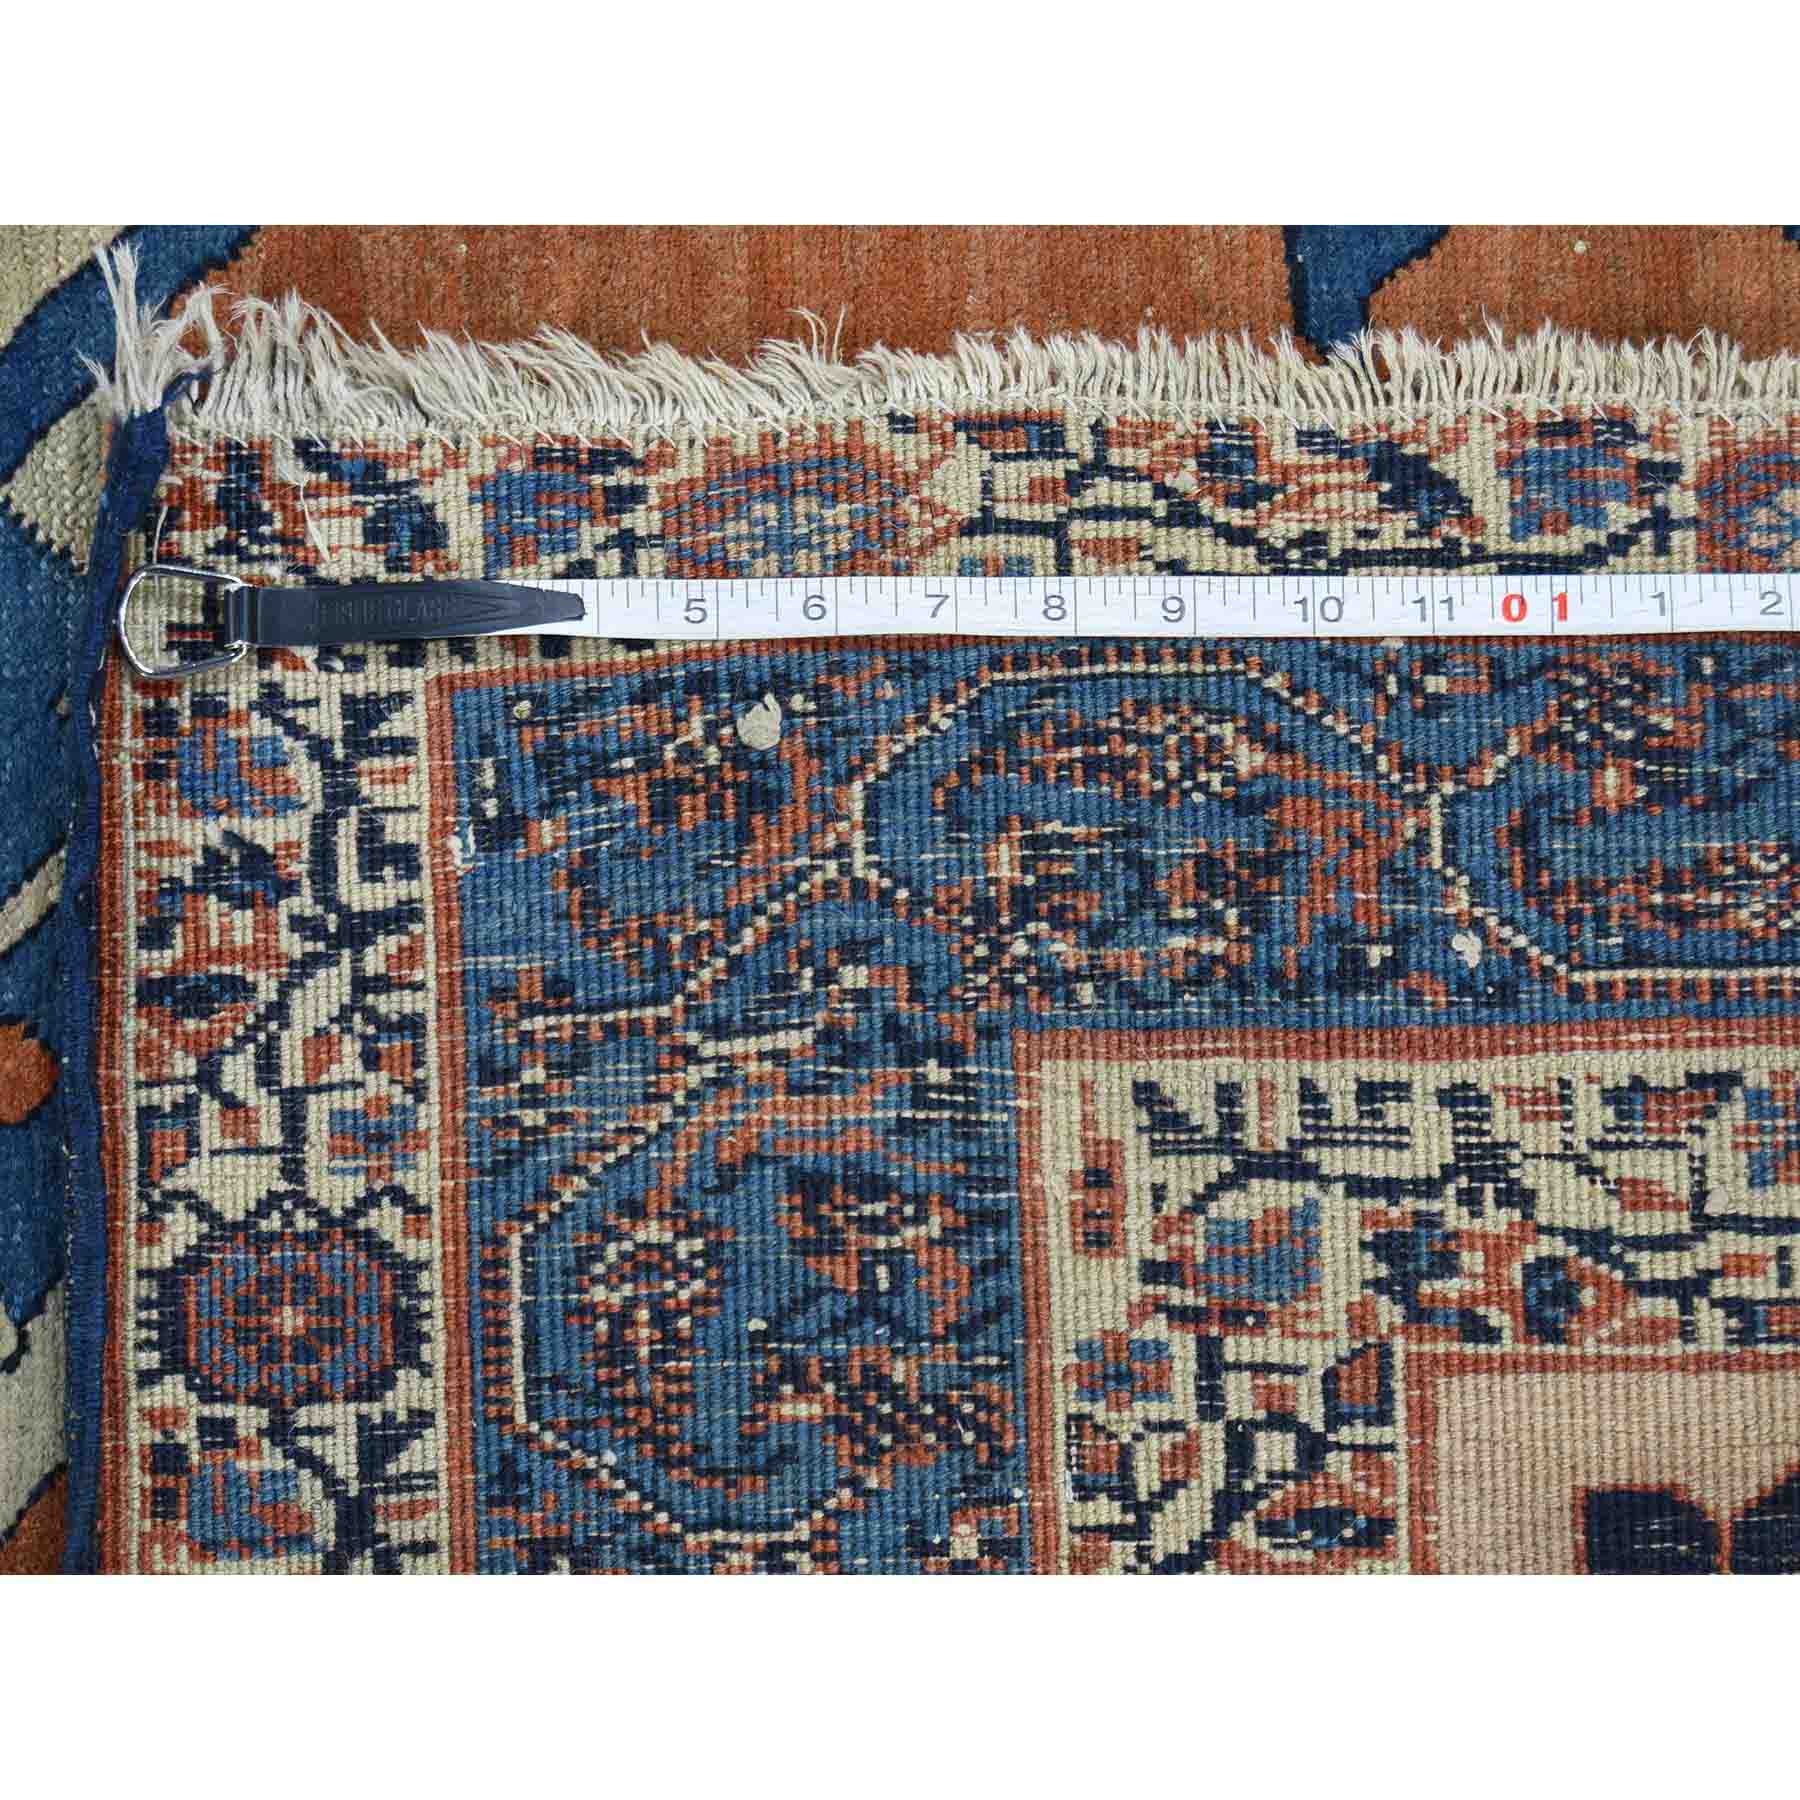 Antique-Hand-Knotted-Rug-198755